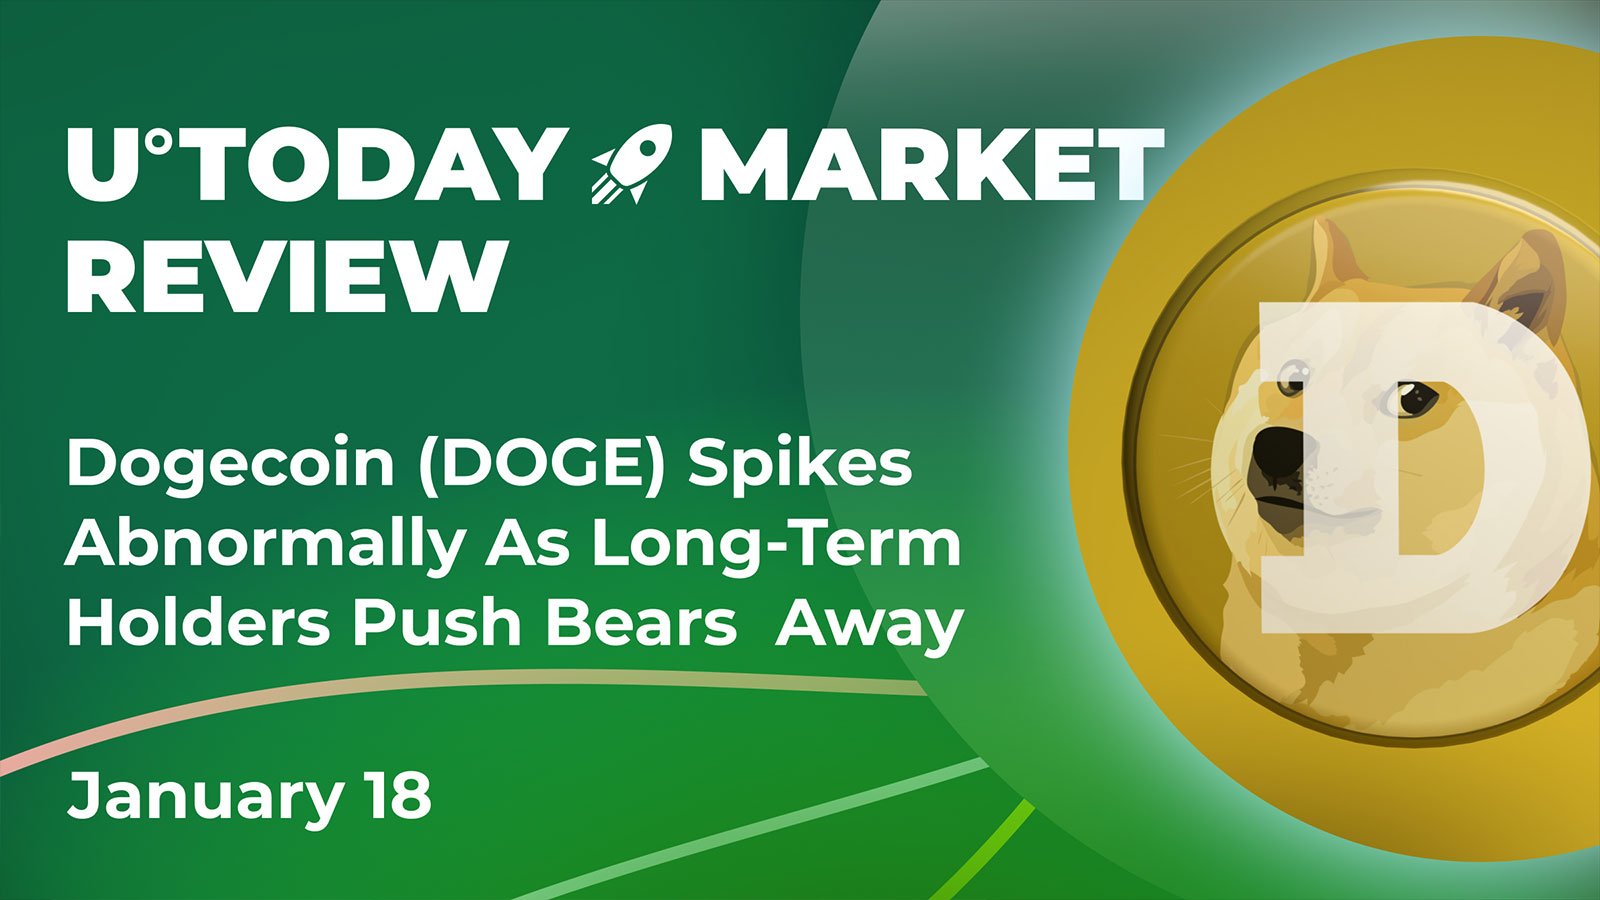 Dogecoin (DOGE) Spikes Abnormally as Long-Term Holders Push Short-Term Holders Away: Crypto Market Review, Jan. 18